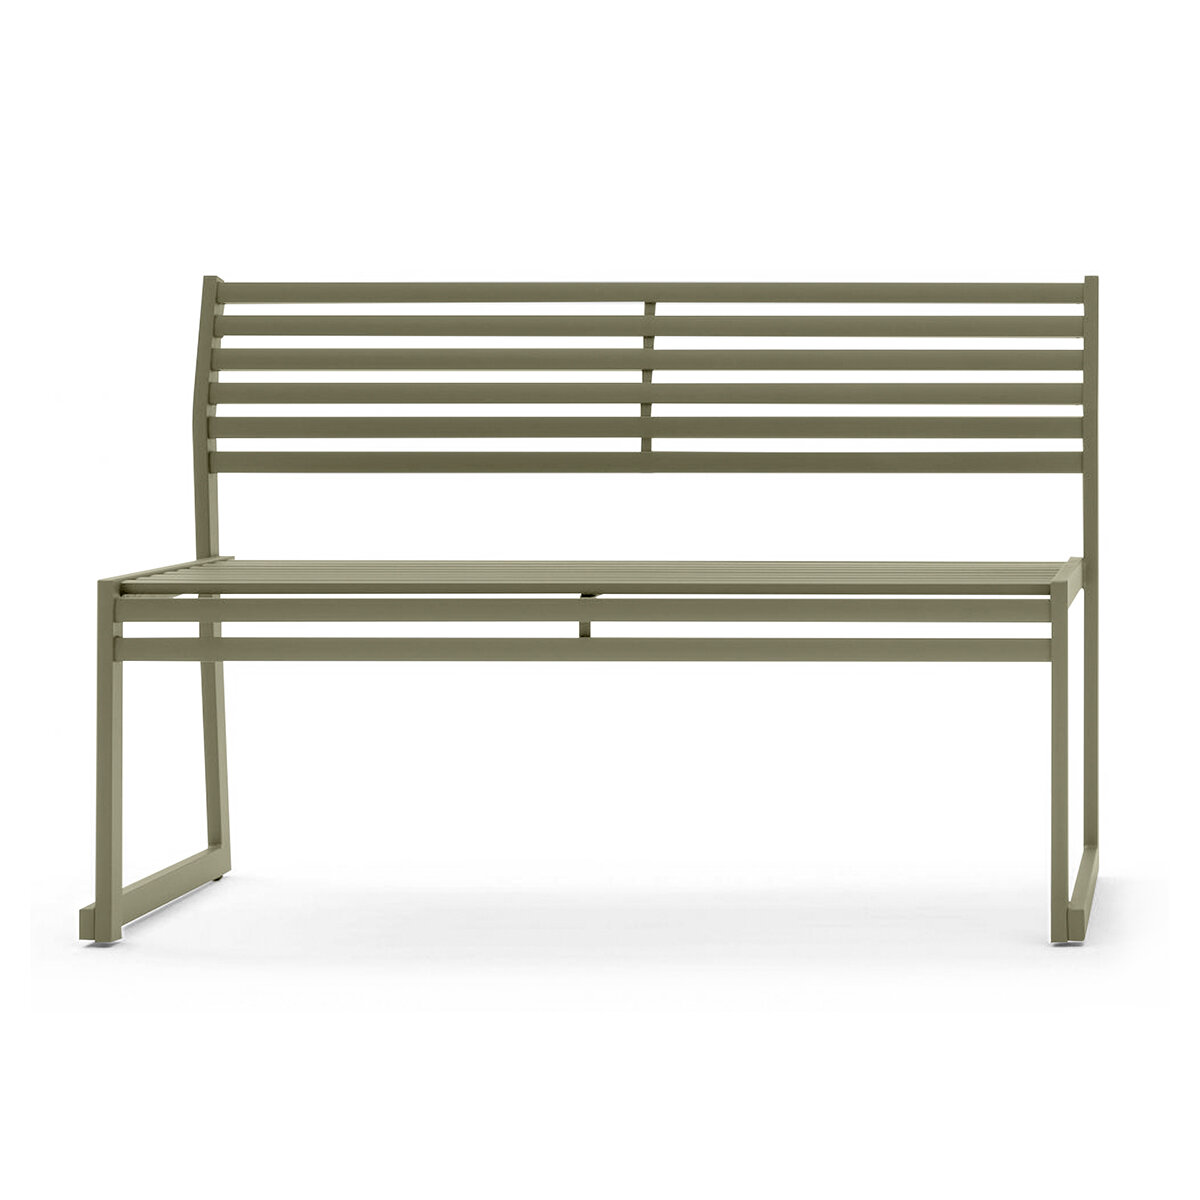 library-images-cbenchbackrest-9a4-double-bench-sand-finish.jpeg